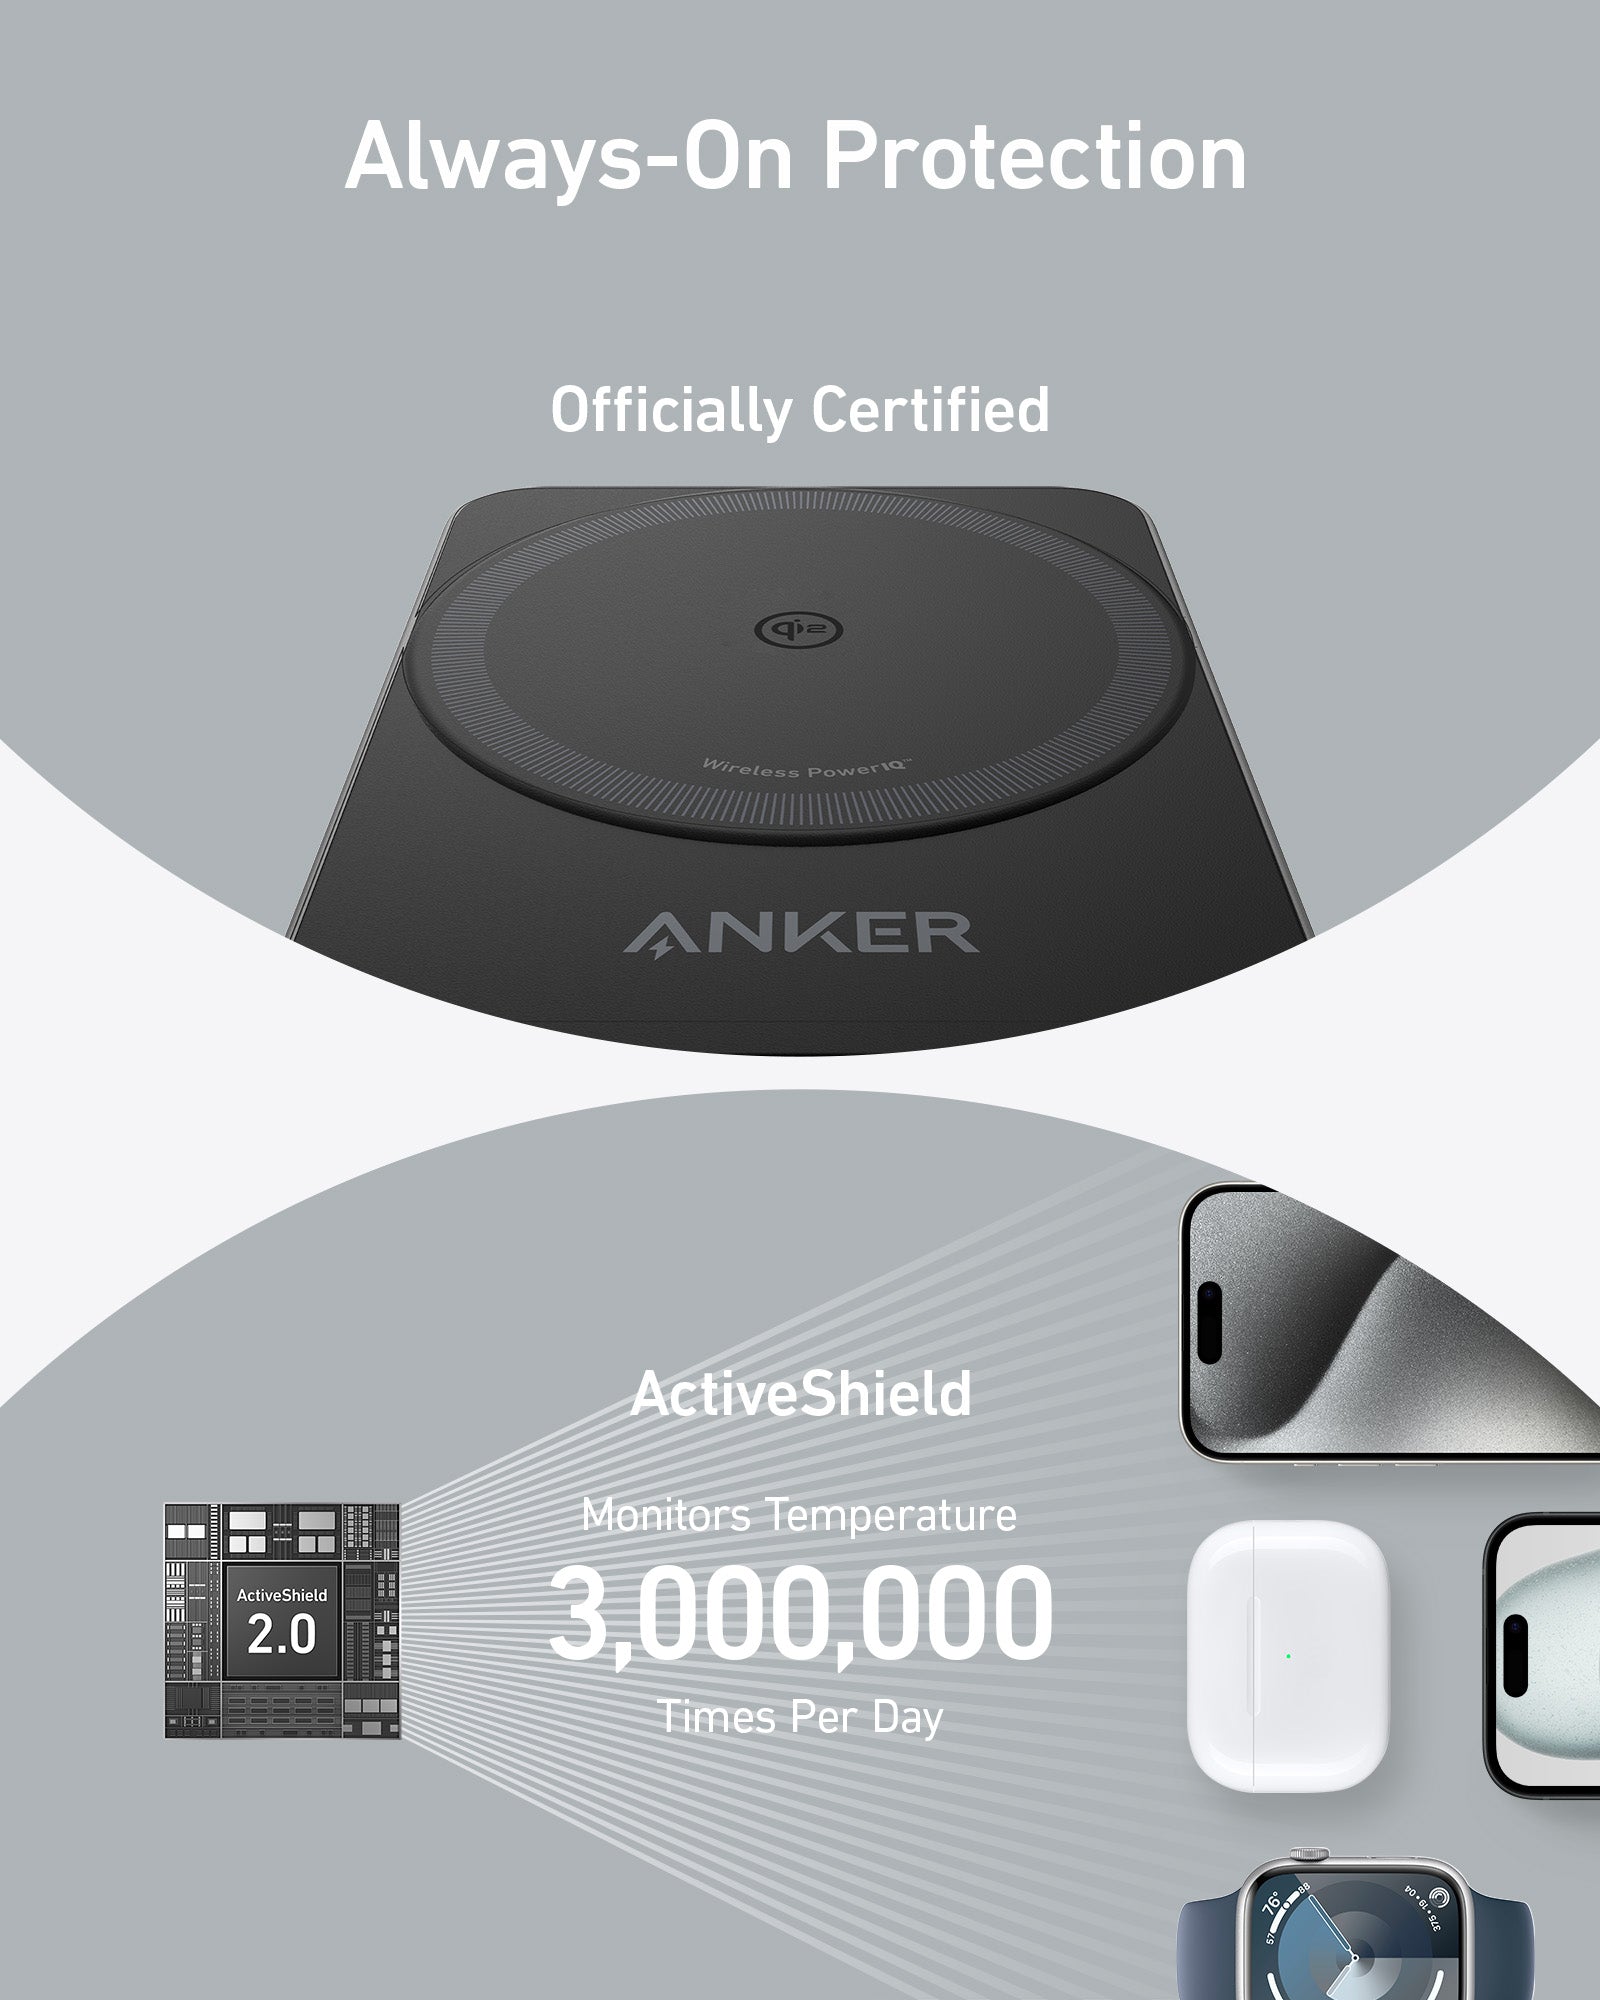 Anker 15W MagSafe charger launches with triangular design